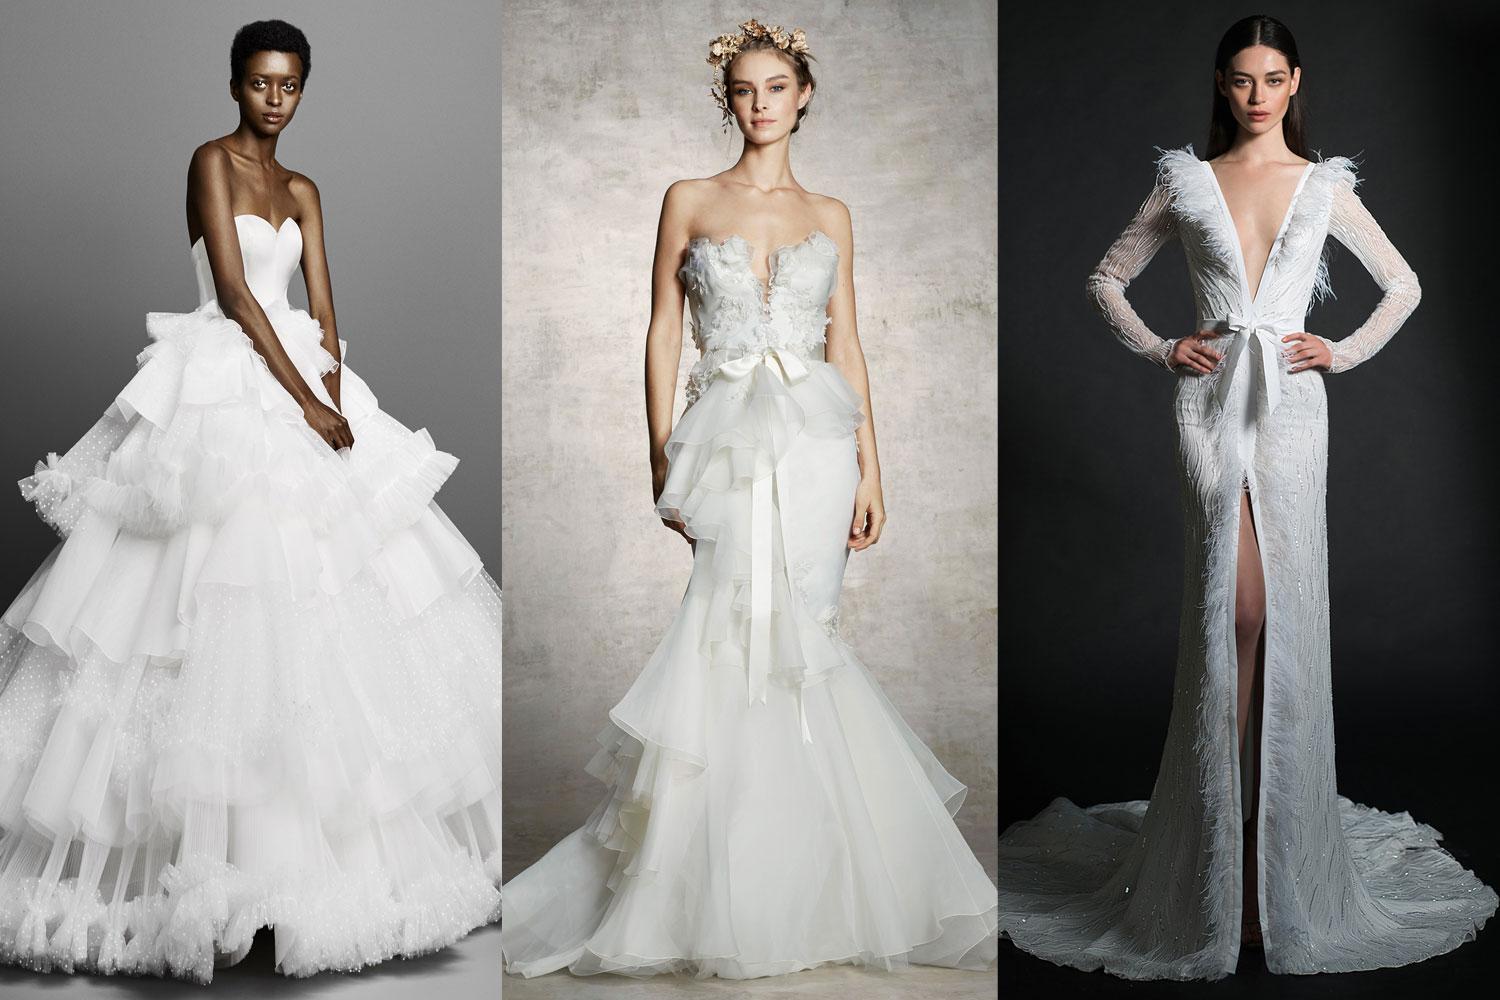 14 Best Wedding Dress Trends From the Spring 2019 Bridal Shows